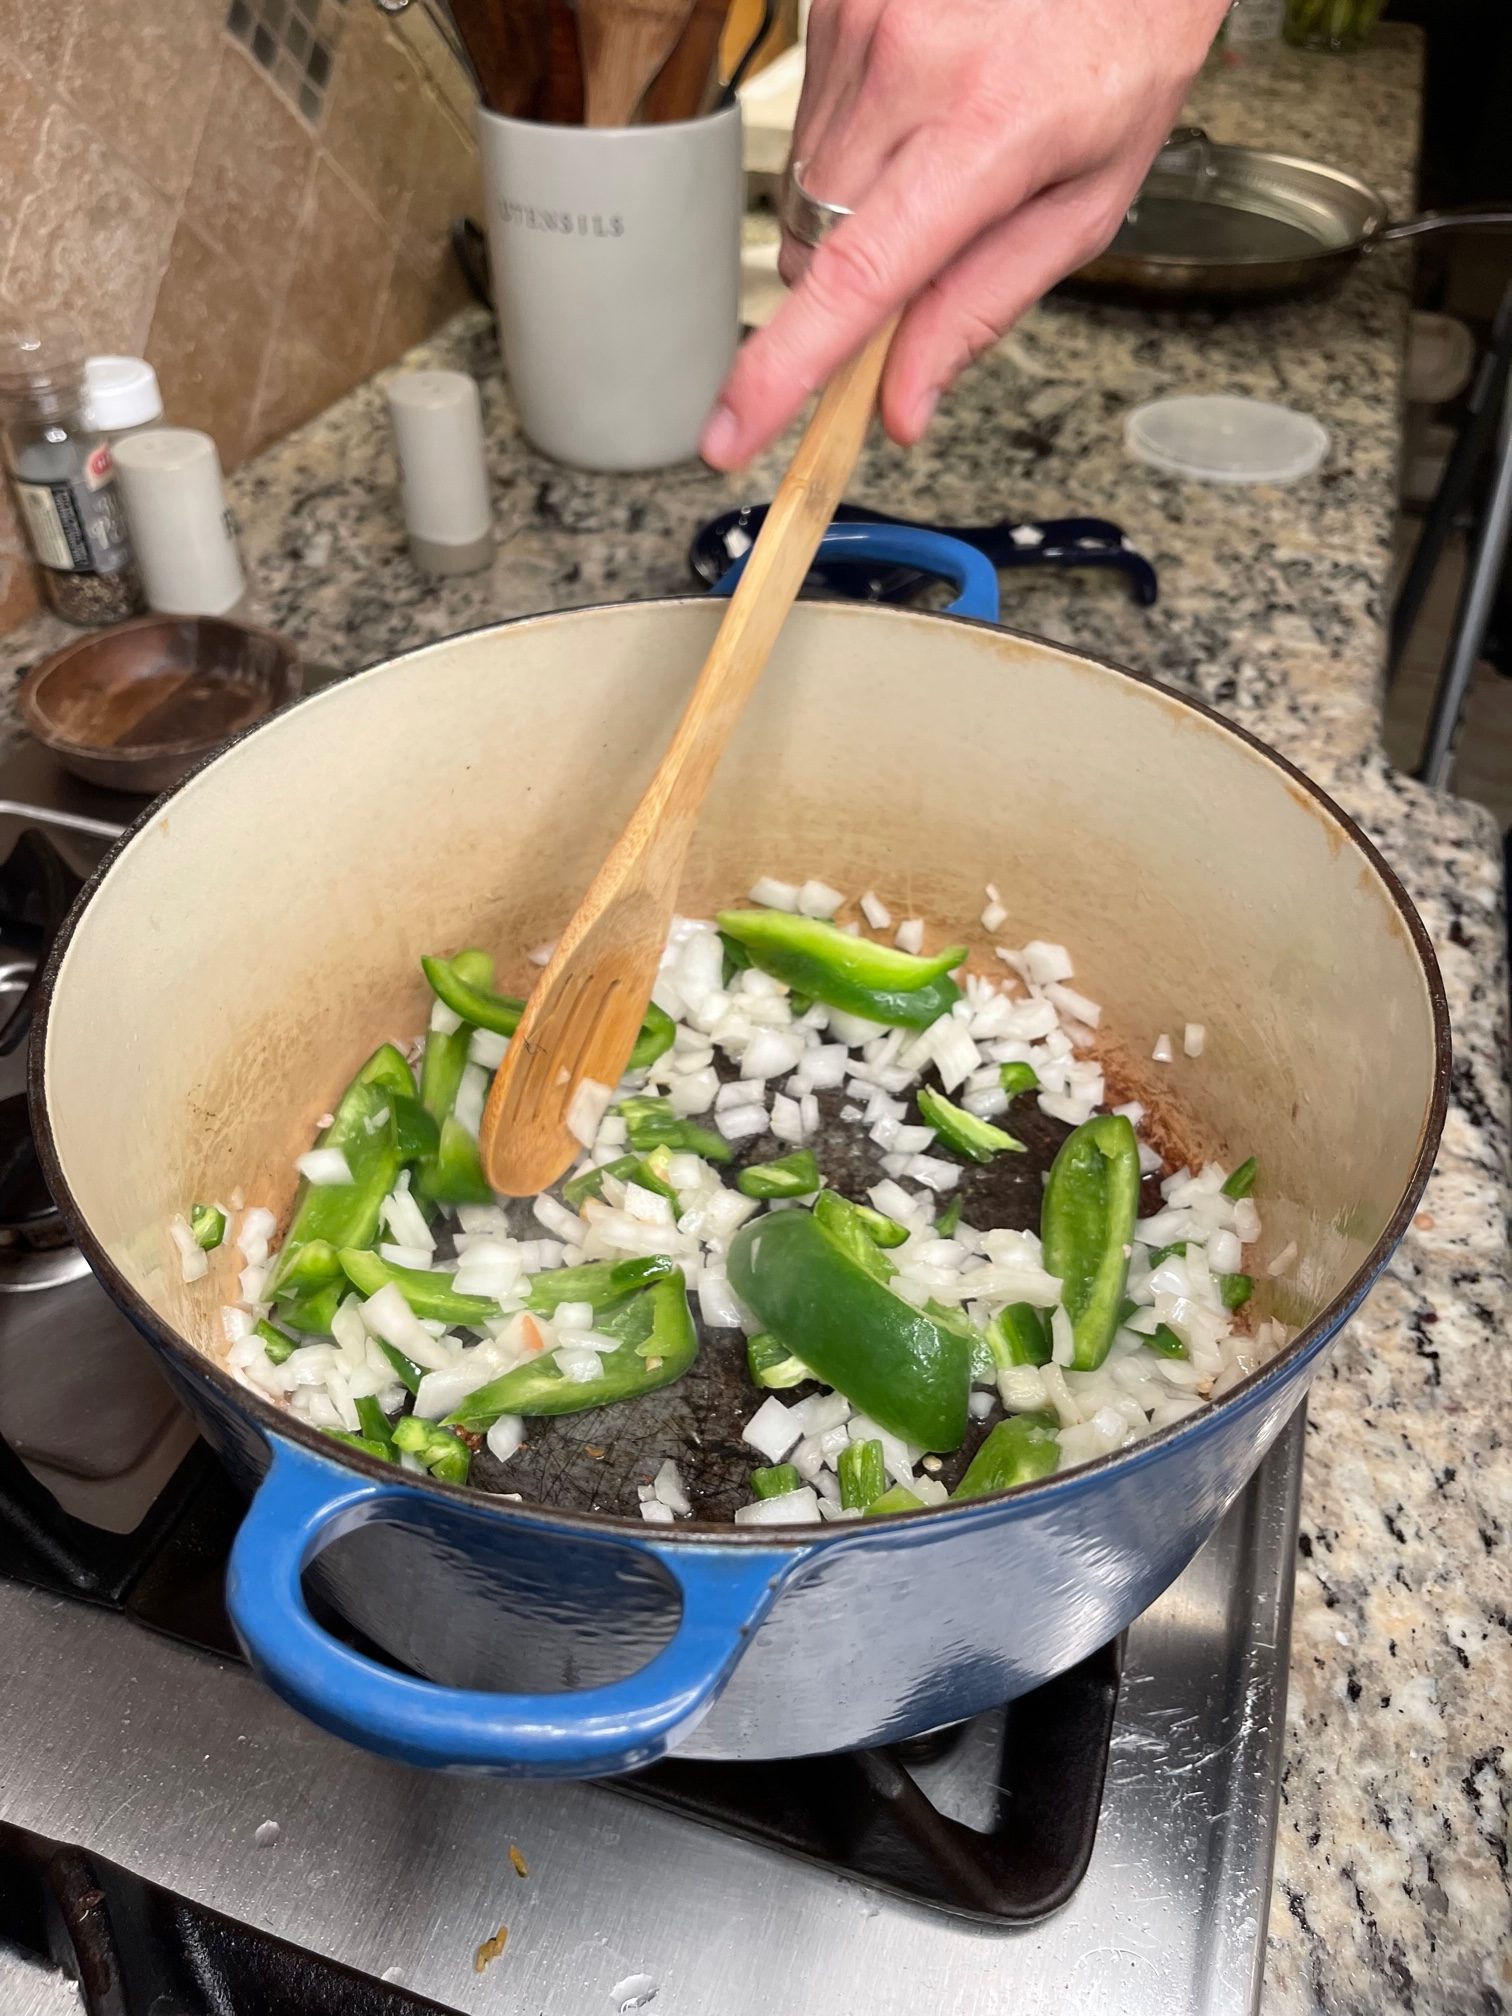 Making Carne guisada stirring pot with raw onions, garlic, bell peppers and jalapenos